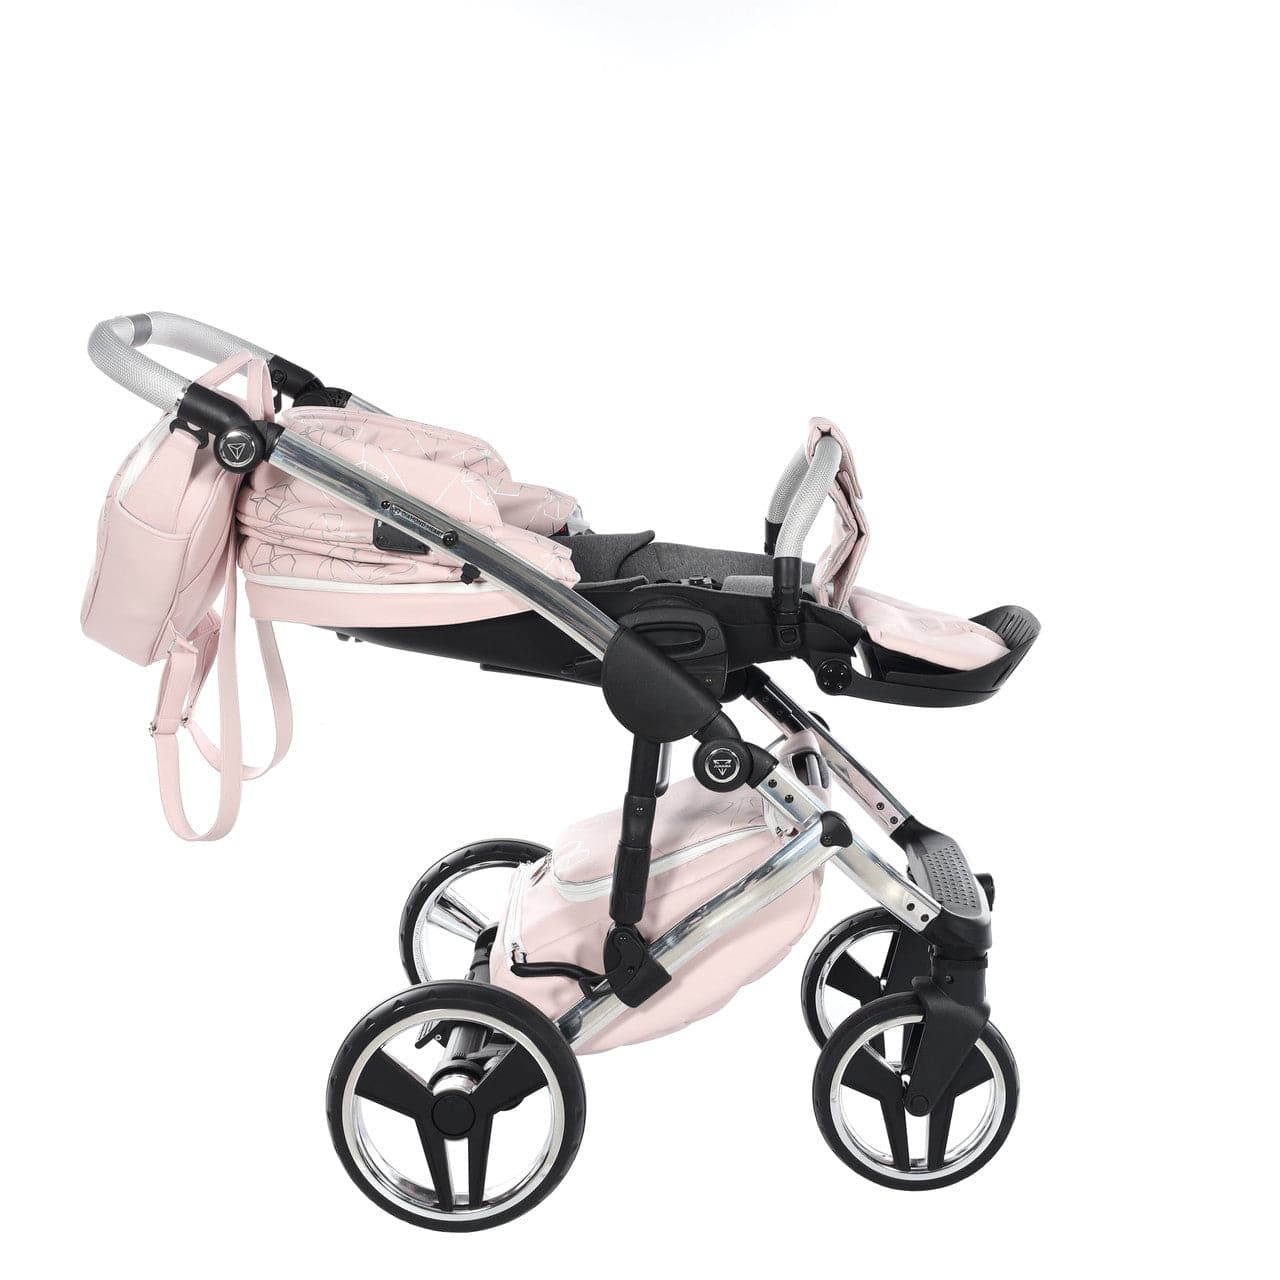 Junama Heart 2 In 1 Pram - Pink -  | For Your Little One